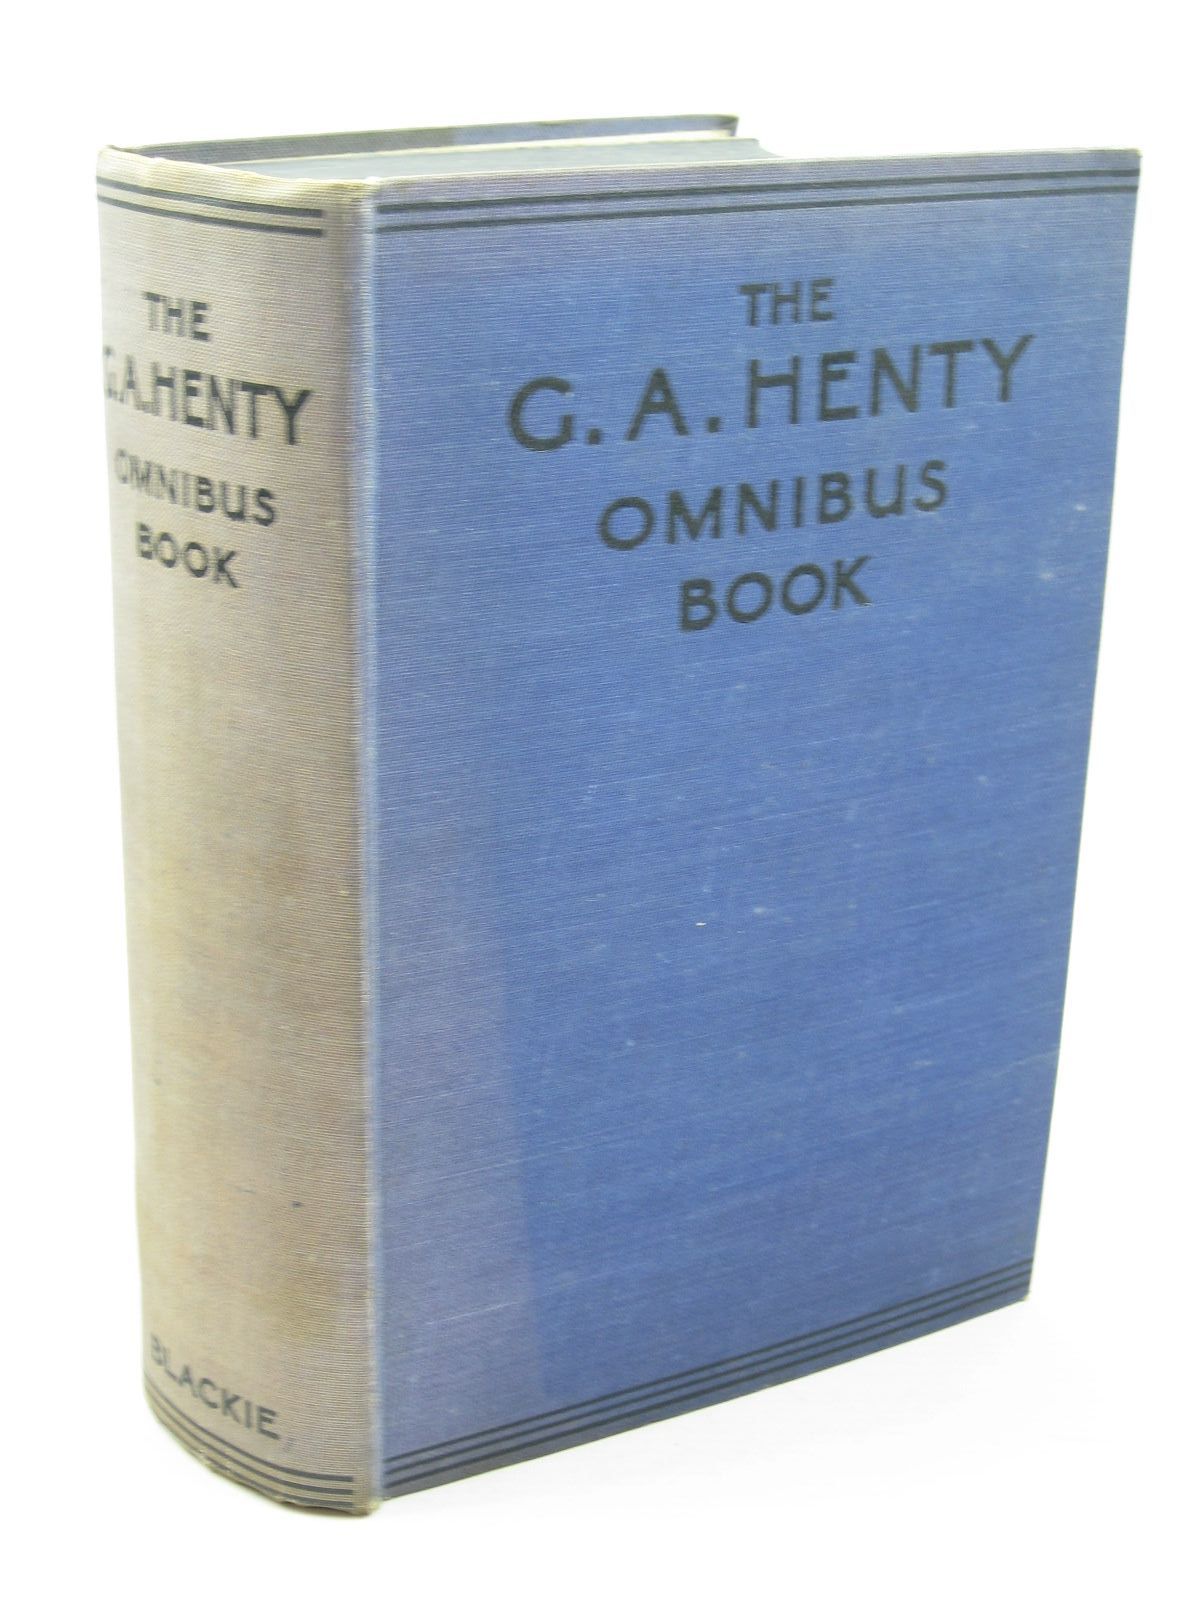 Cover of THE G.A. HENTY OMNIBUS BOOK by G.A. Henty